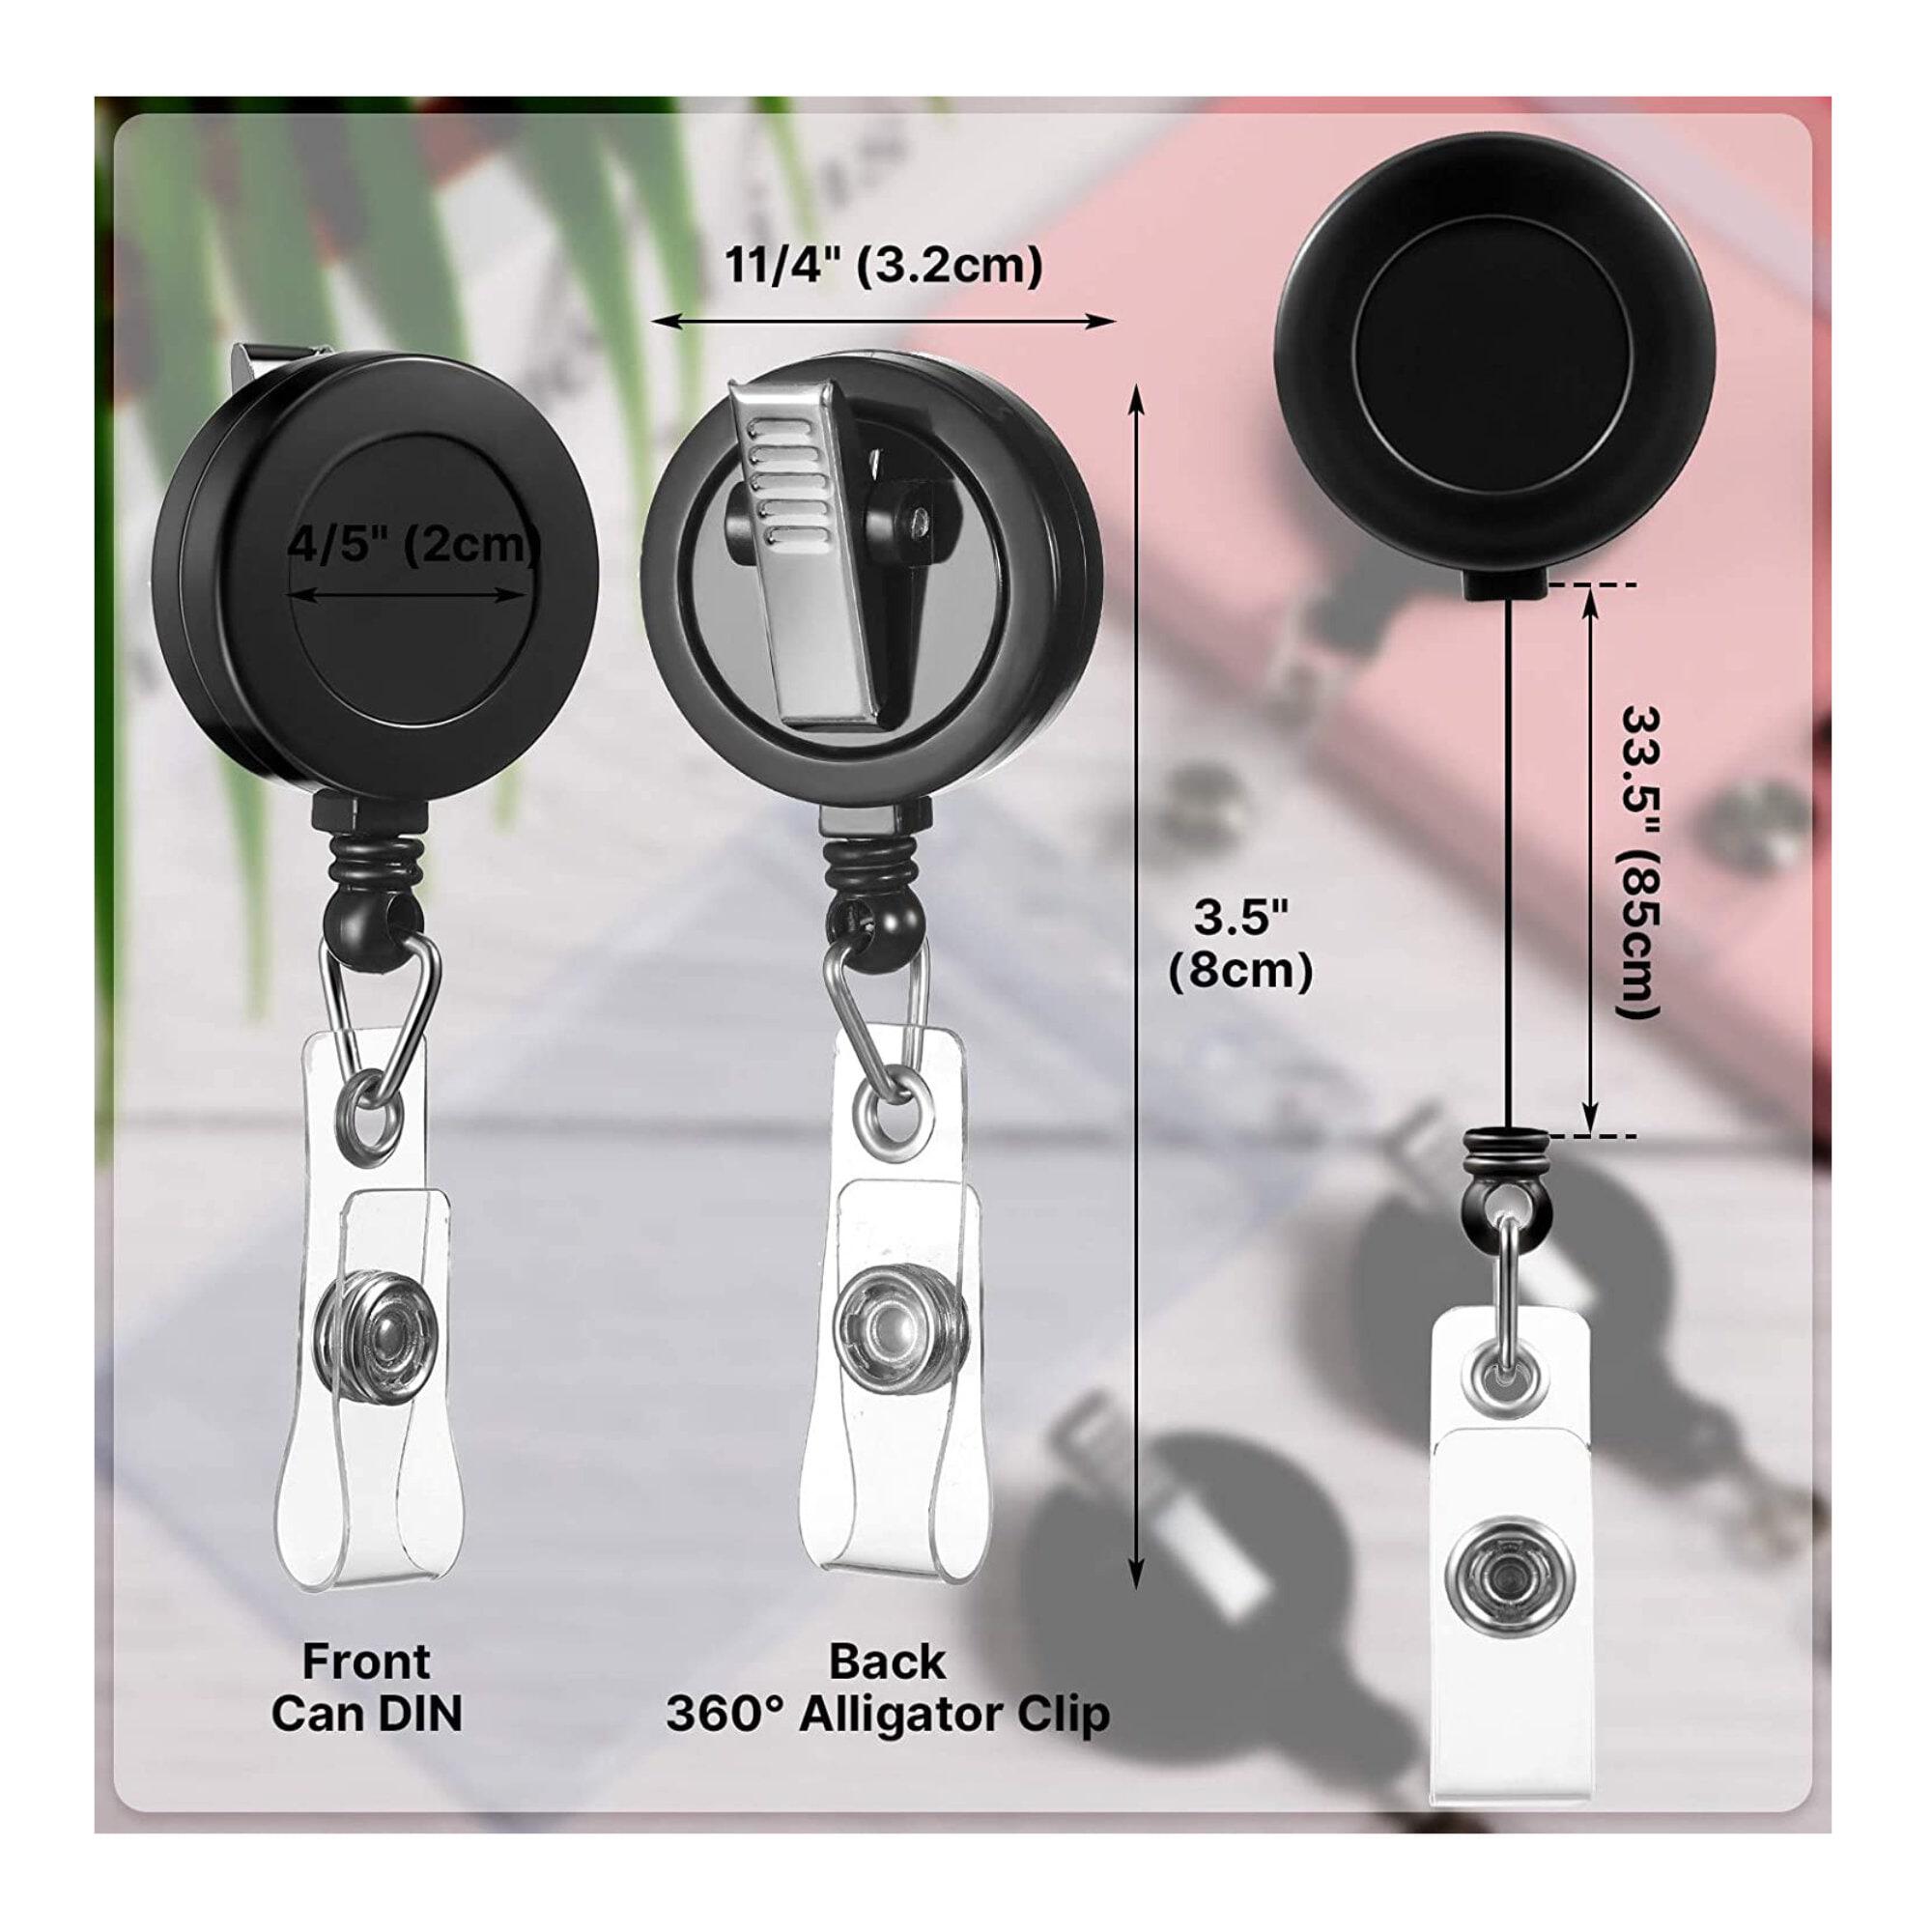 The Ostomy Bag badge reel is one of the most purchased badge reels